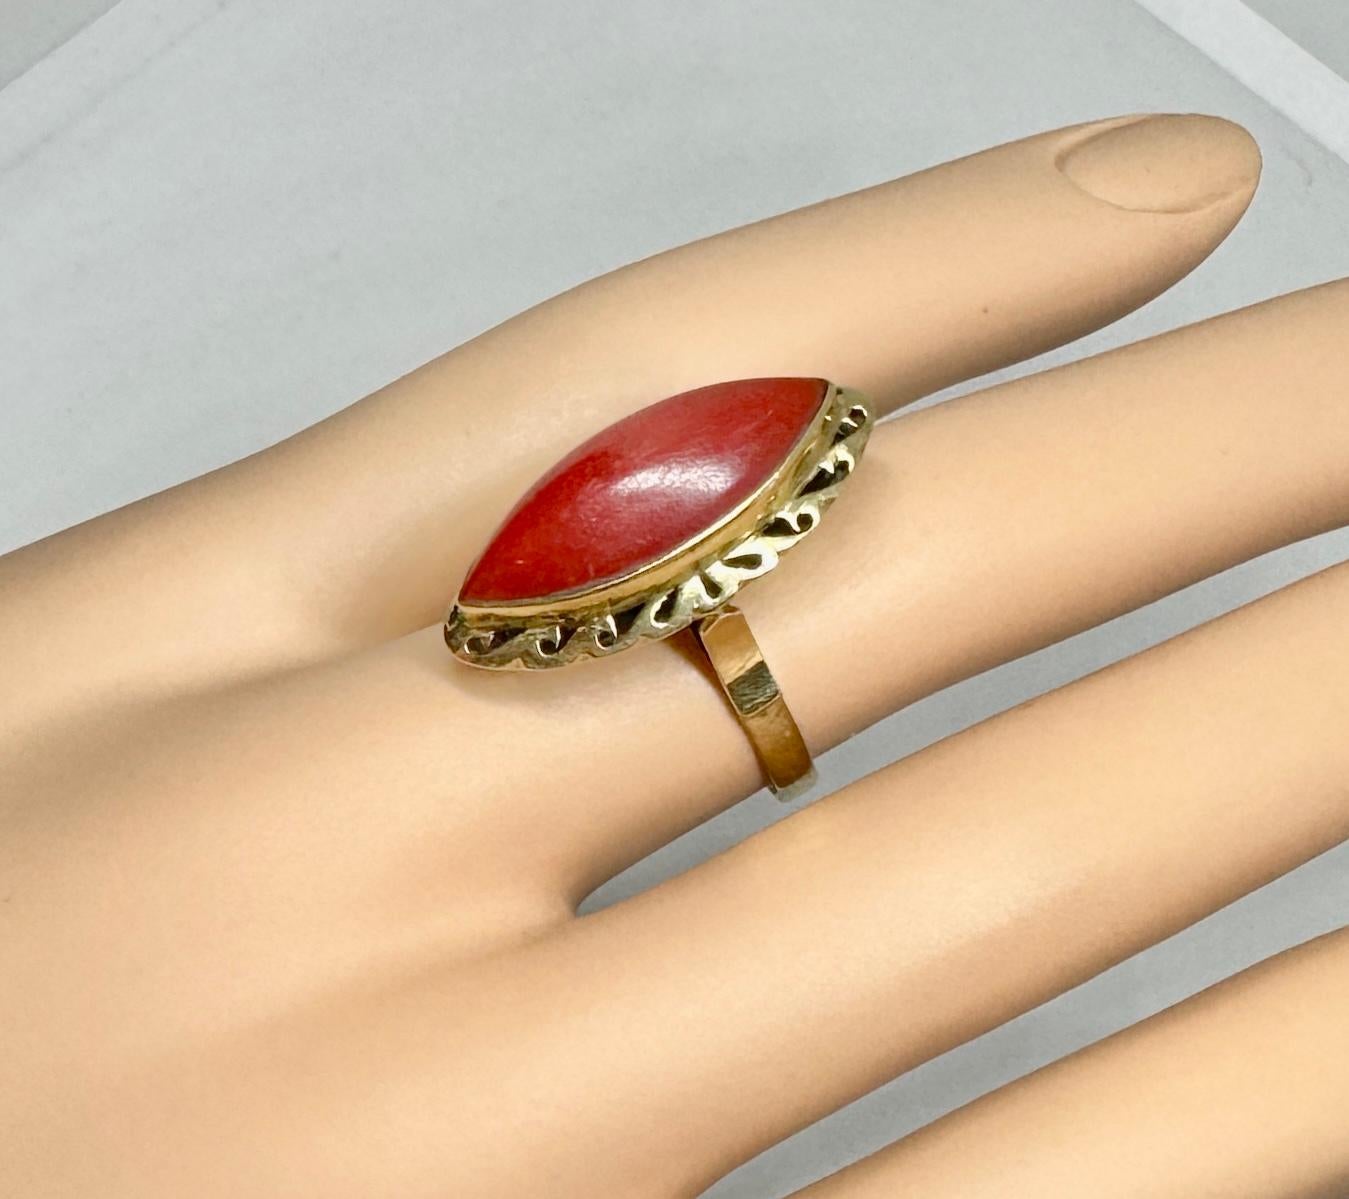 This is a magnificent original antique Art Deco Ring with a beautiful natural Red Coral Cabochon set in a stunning Art Deco design in 14 Karat Gold.  The ring is a masterpiece of the Art Deco period with its dramatic color and style yet very clean